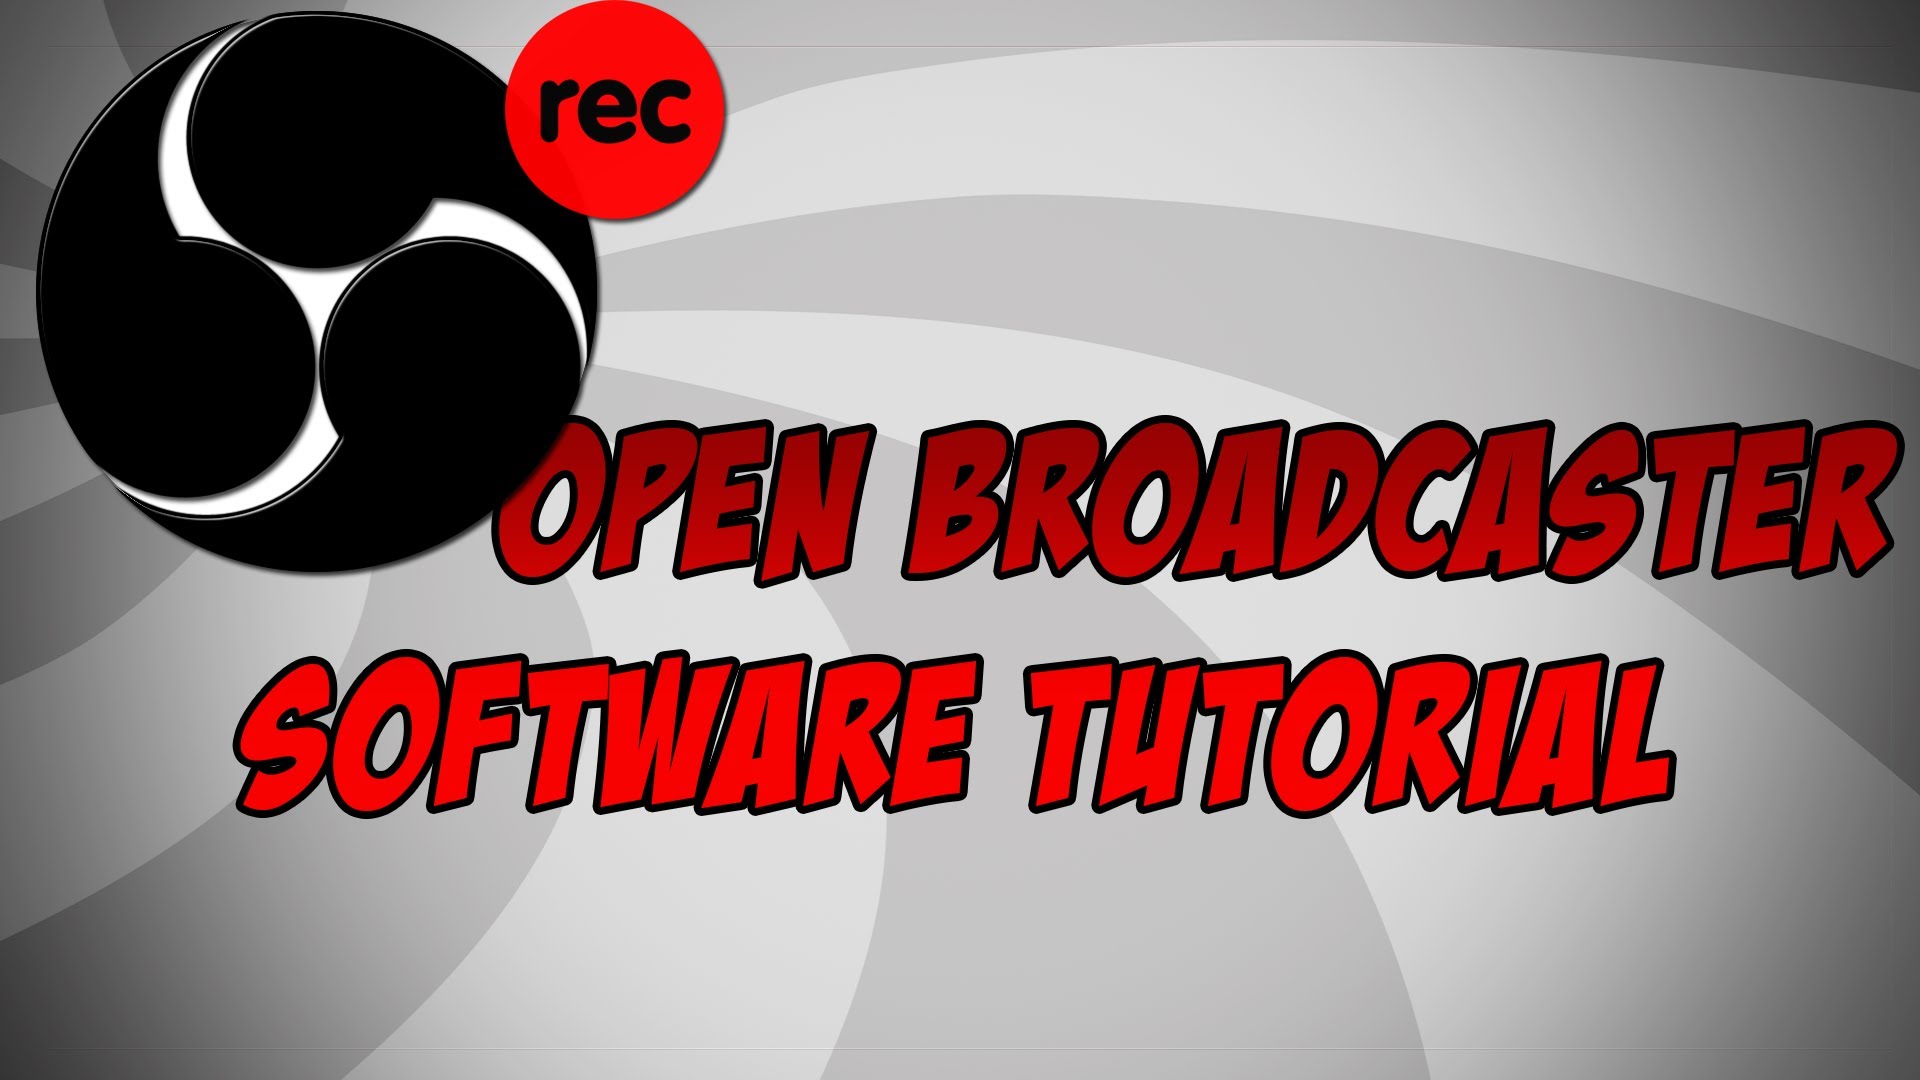 Open broadcaster